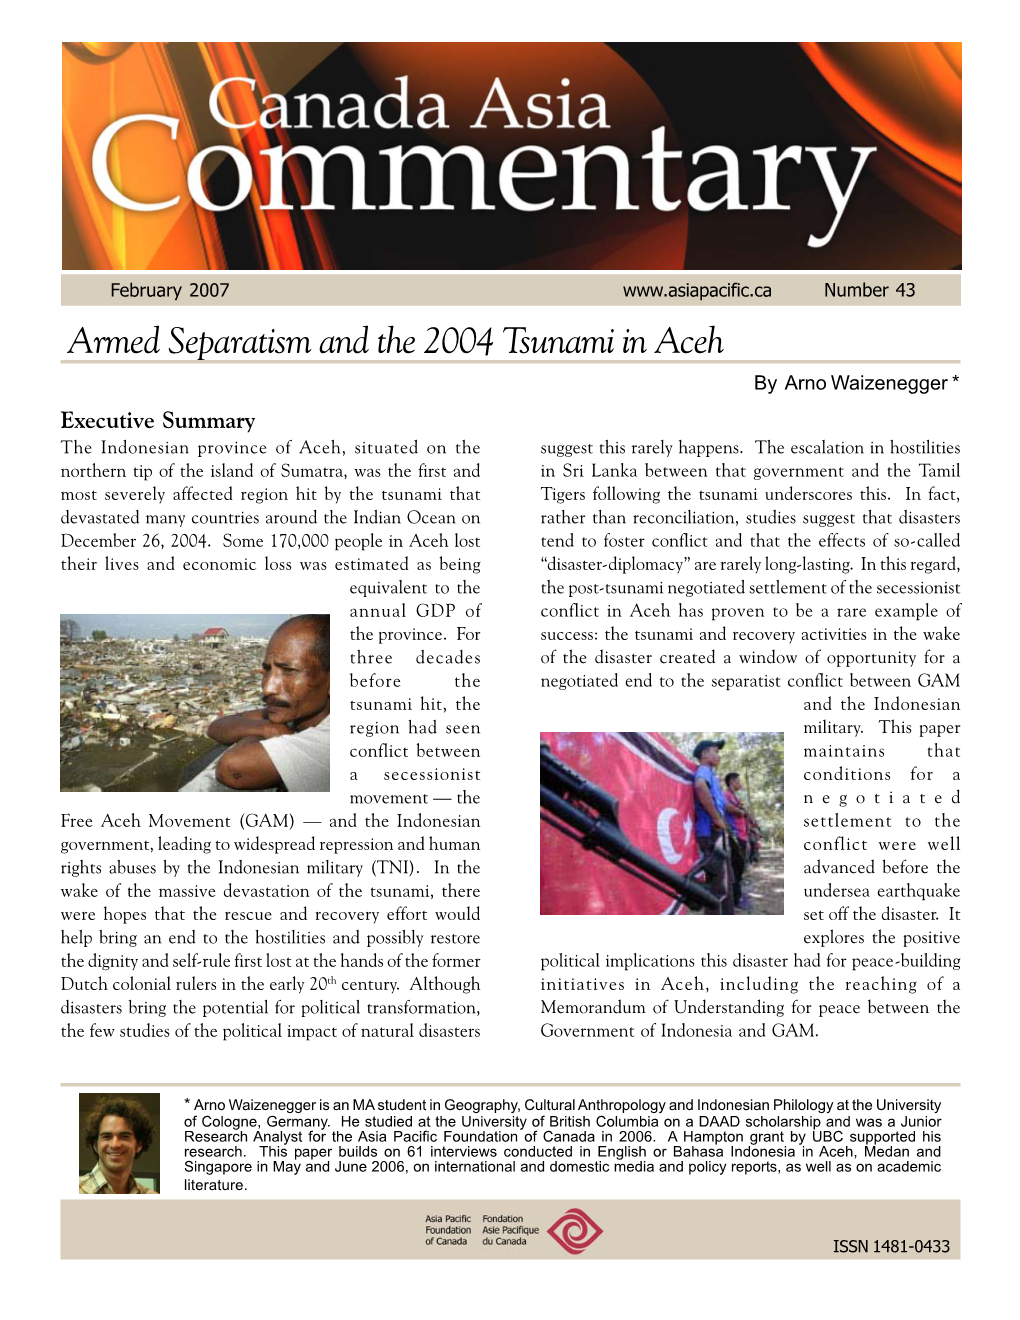 Armed Separatism and the 2004 Tsunami in Aceh by Arno Waizenegger * Executive Summary the Indonesian Province of Aceh, Situated on the Suggest This Rarely Happens